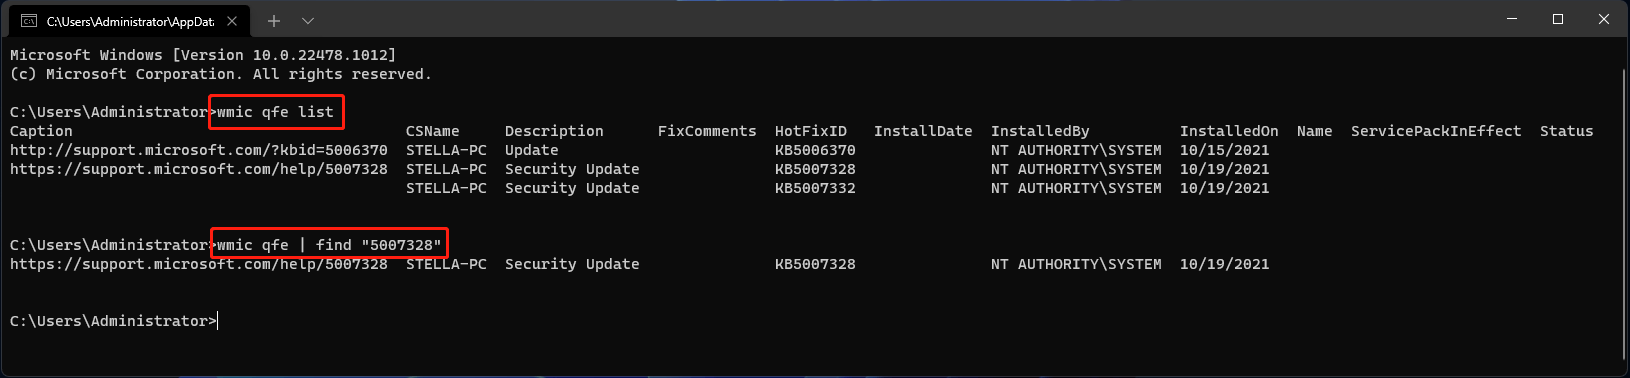 view Windows 11 update history using Command Prompt